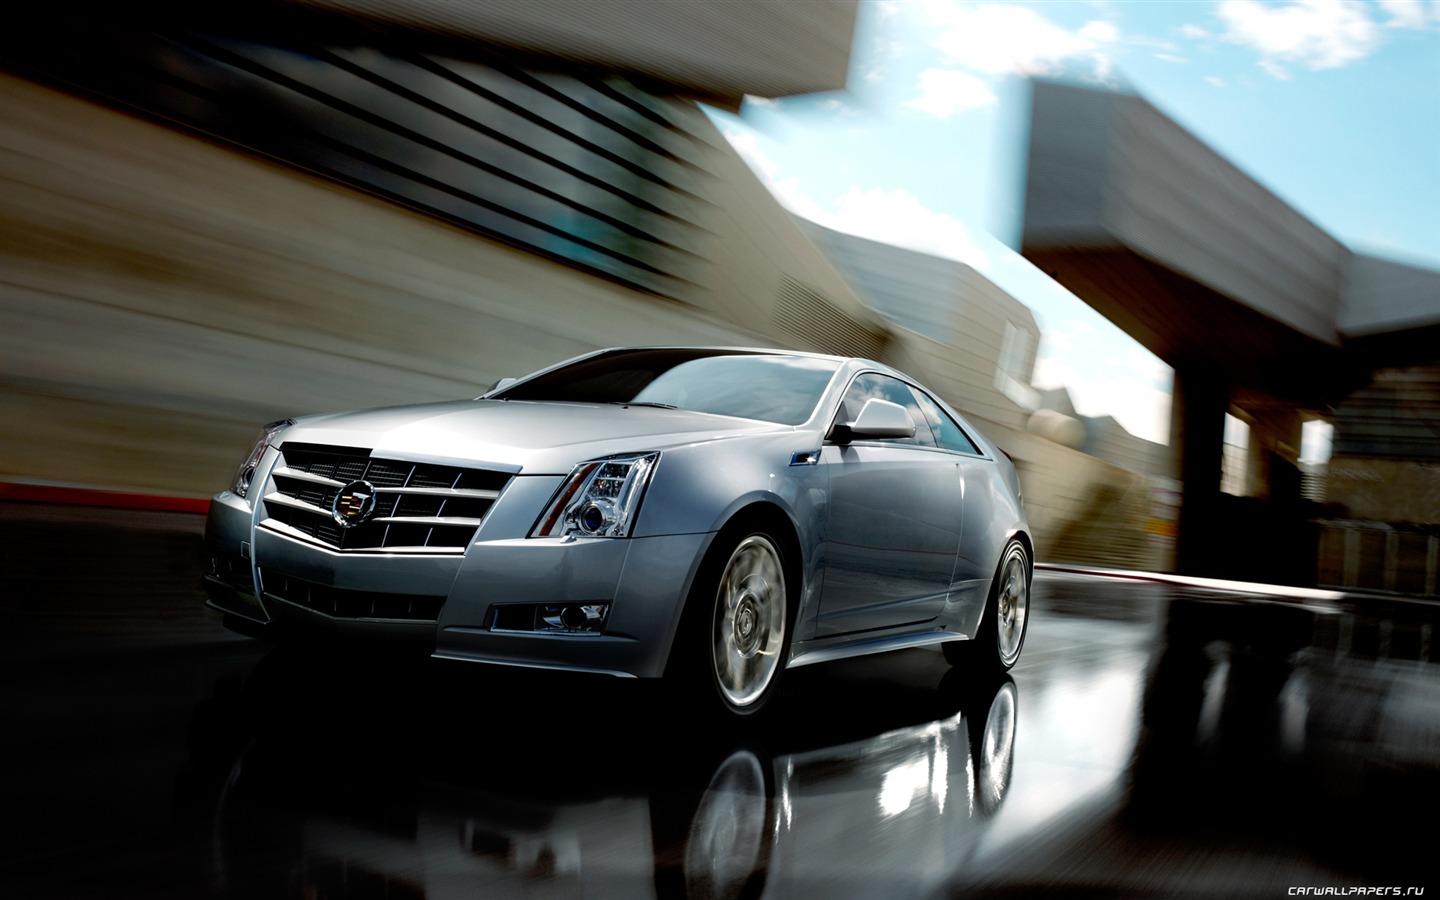 Cadillac CTS Coupe - 2011 凱迪拉克 #10 - 1440x900